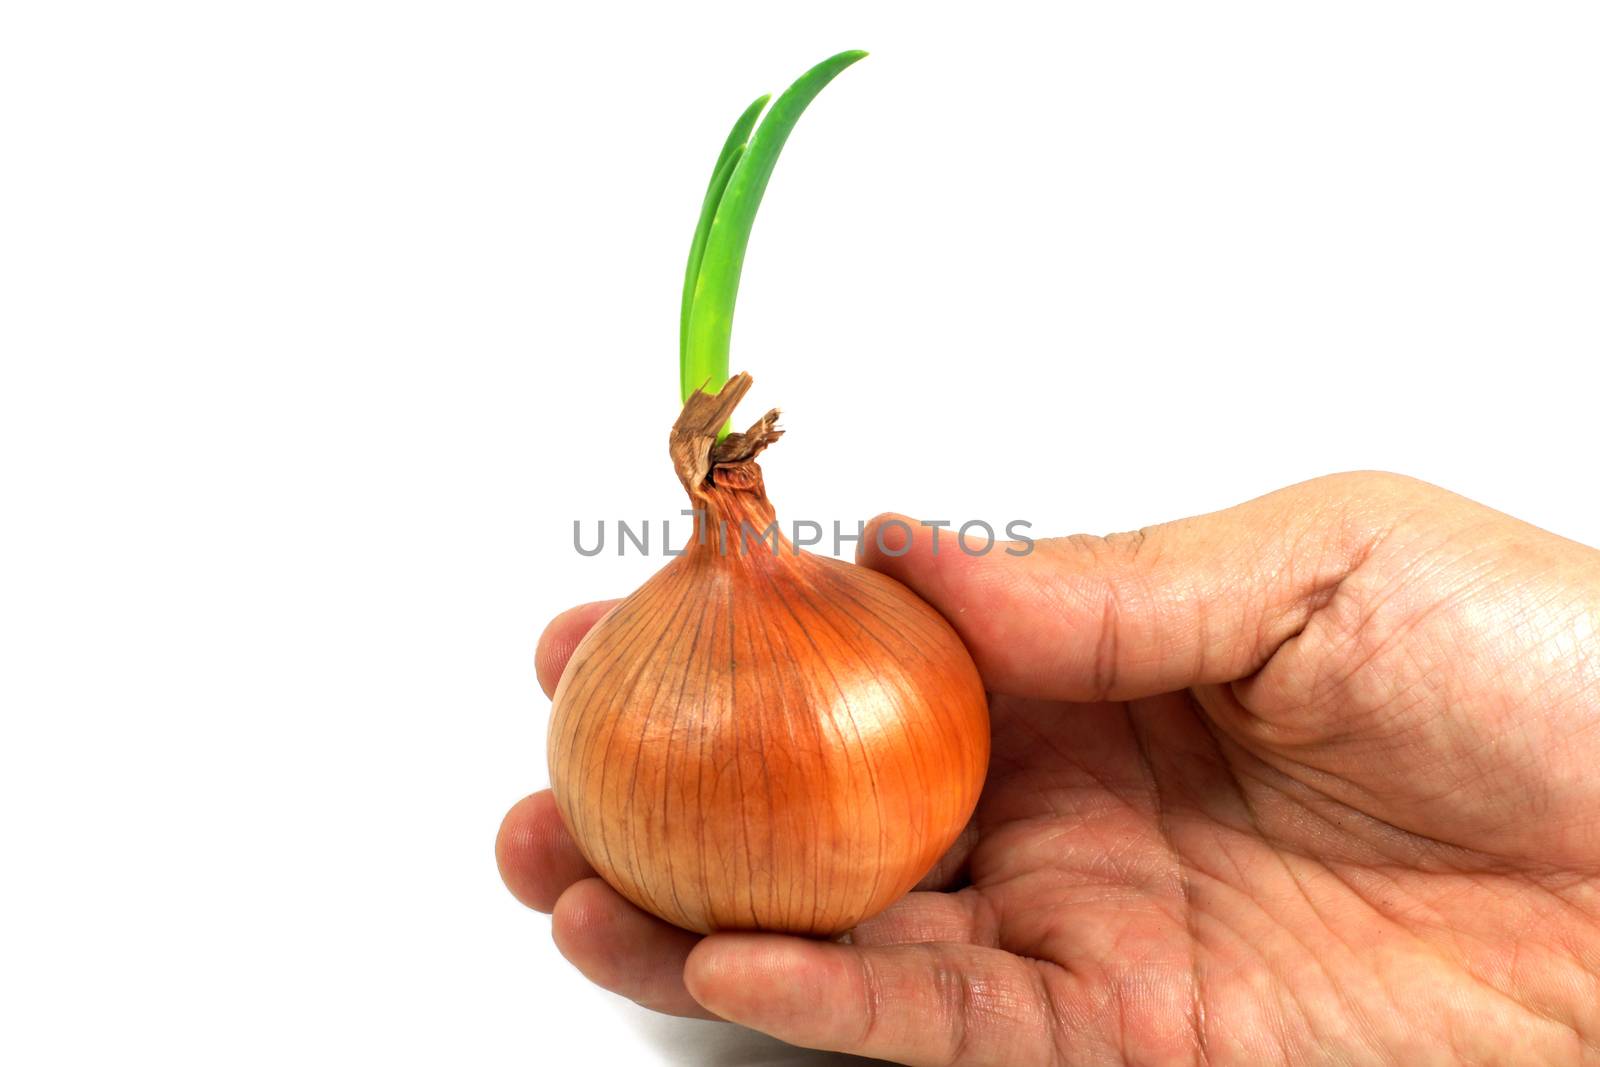 Growing Onion on right hand